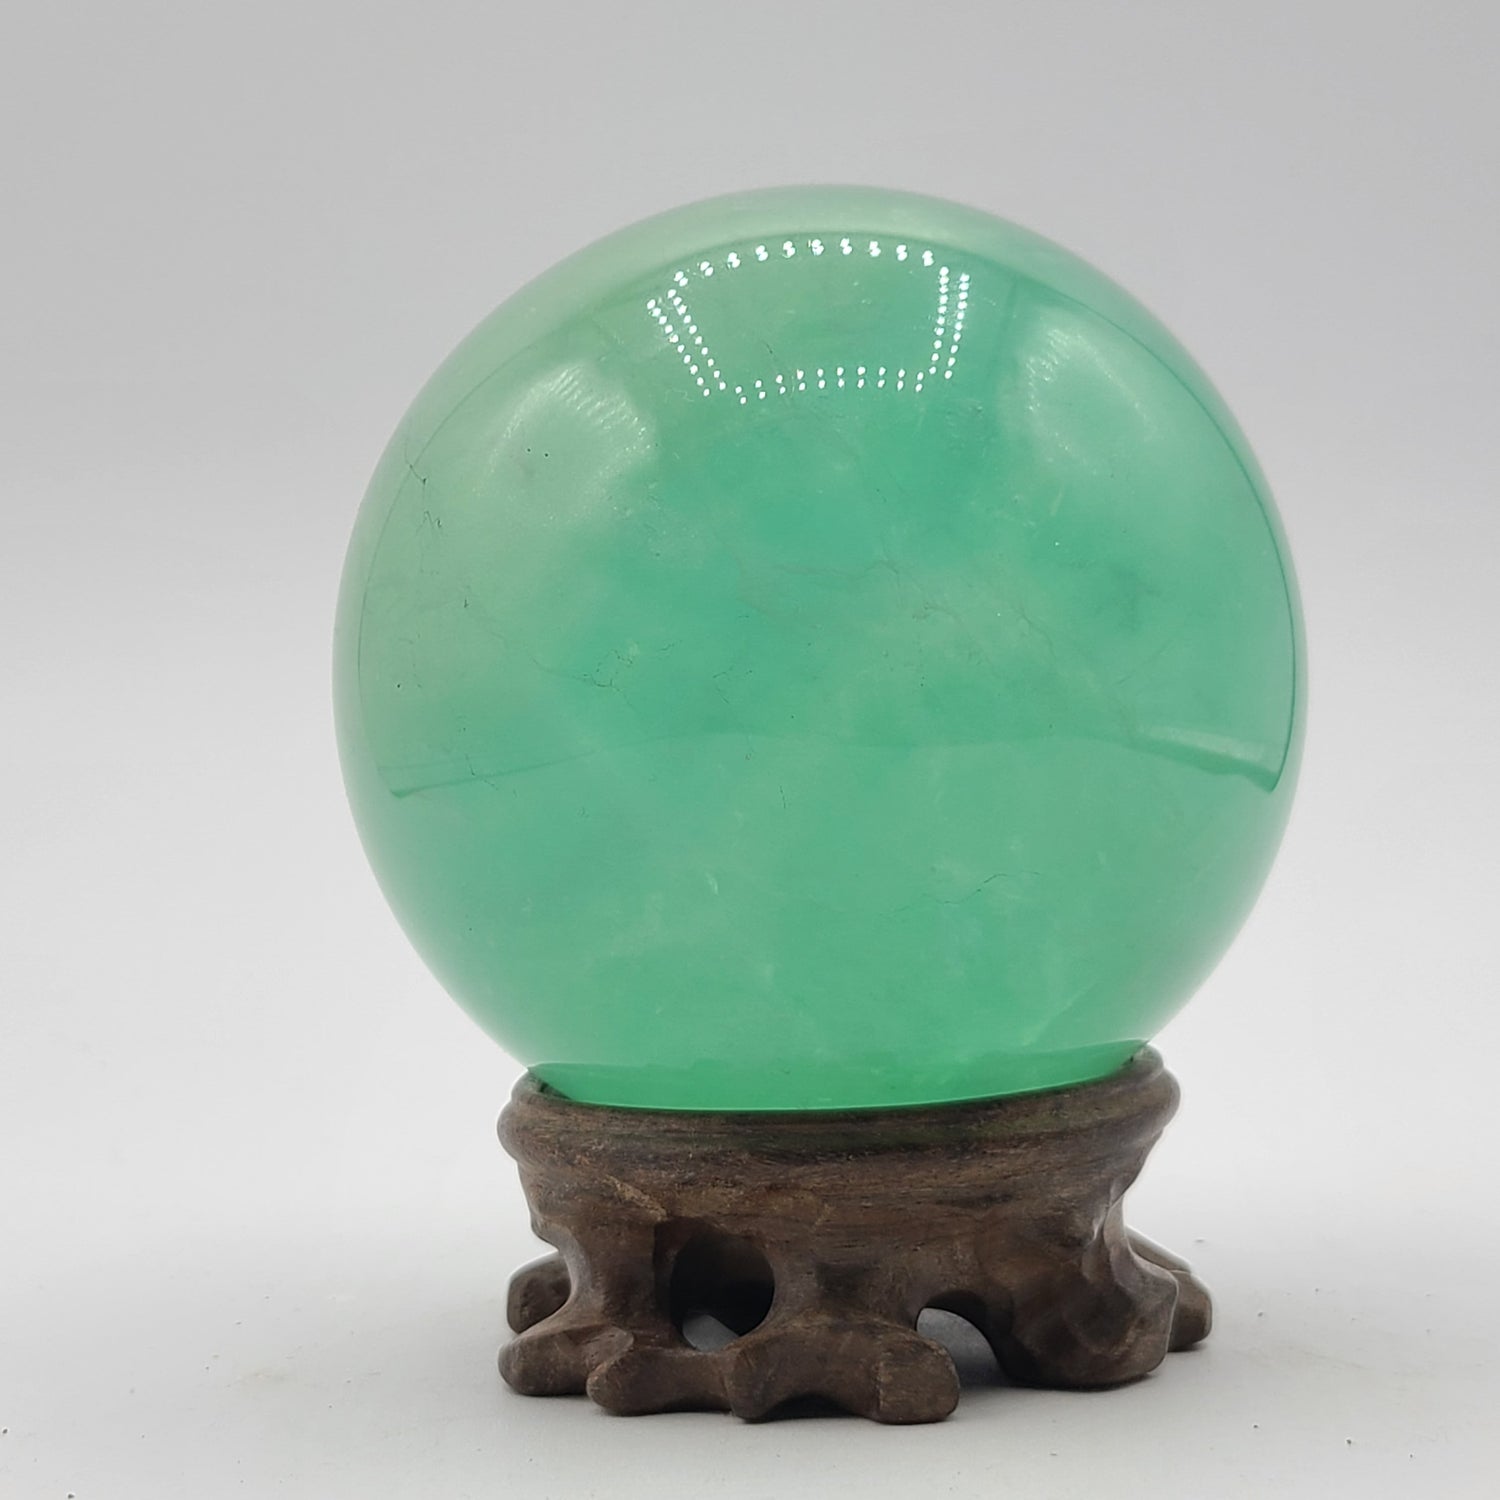 Crystal Spheres and Fortune Telling Tools: Unveil the Secrets of the Universe